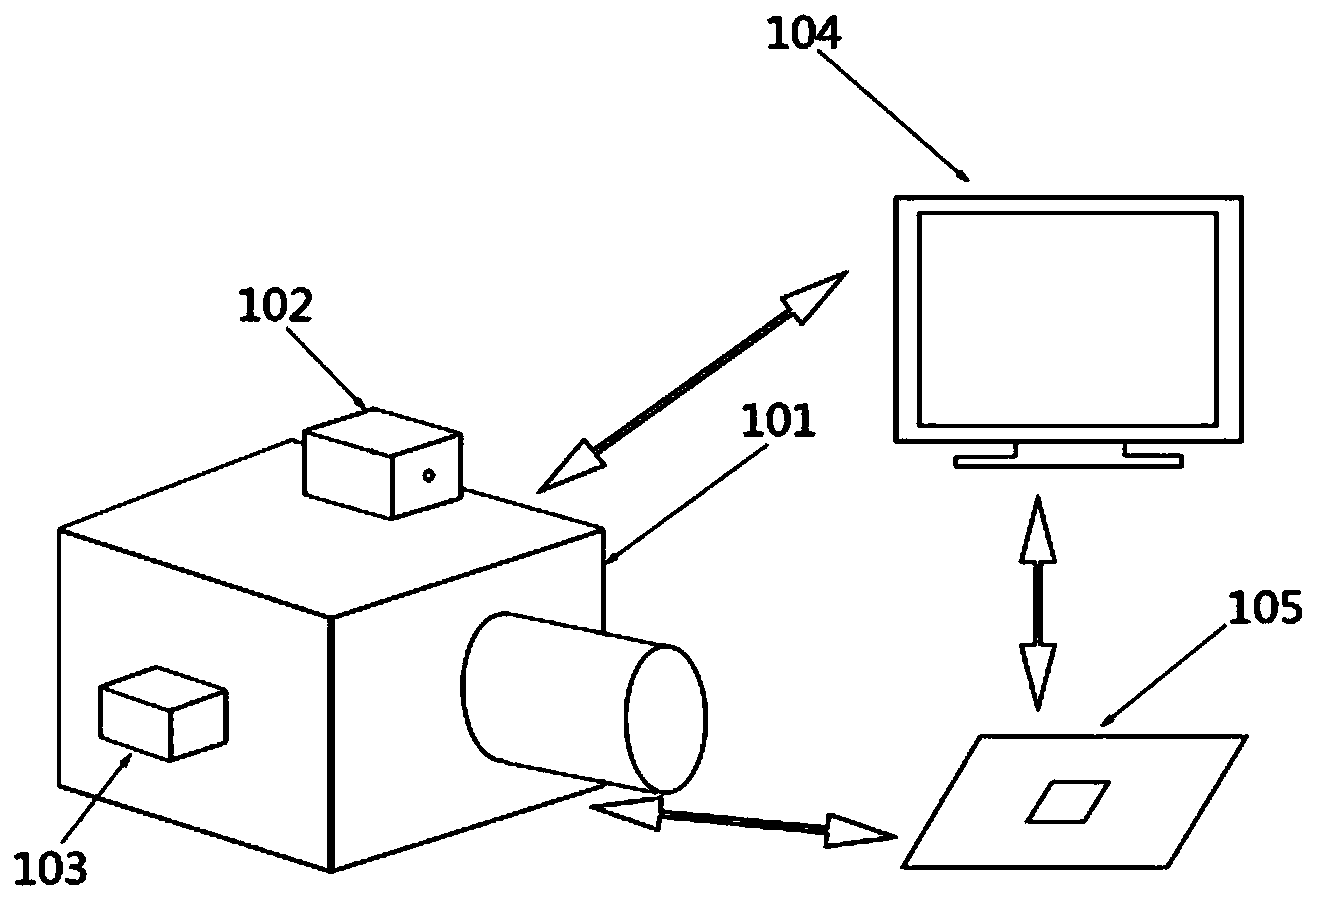 Image deblurring method and device based on motion detection